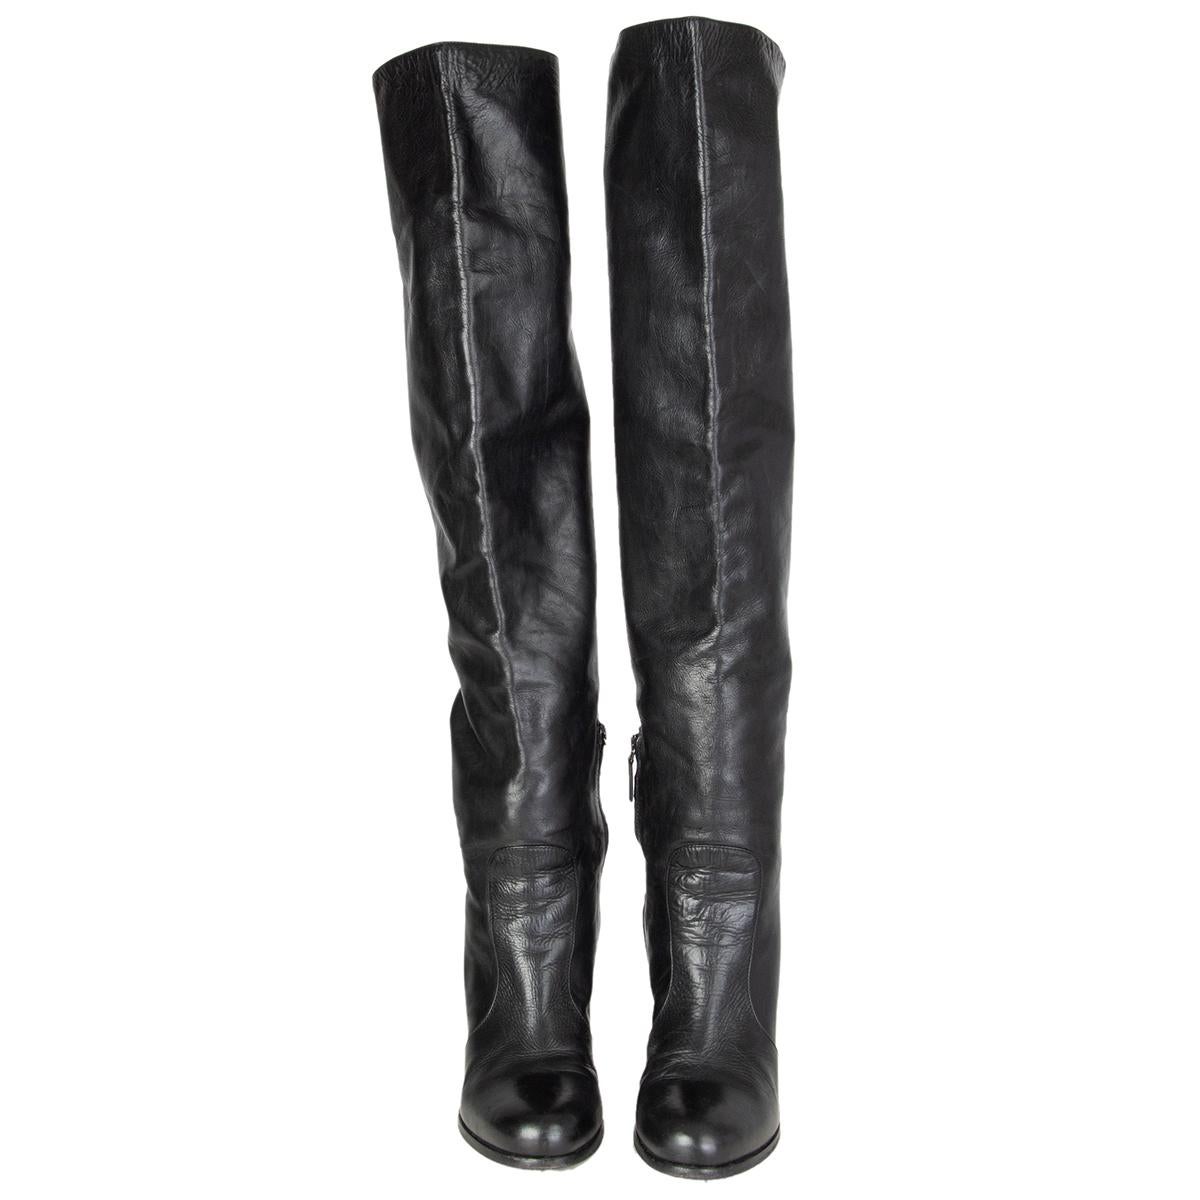 100% authentic Prada over-knee boots in smooth black calfskin featuring a chunky heel. Open with a zipper mid-claf zipper on the inside. Have been worn and are in excellent condition. 

Measurements
Imprinted Size	38
Shoe Size	38
Inside Sole	25cm